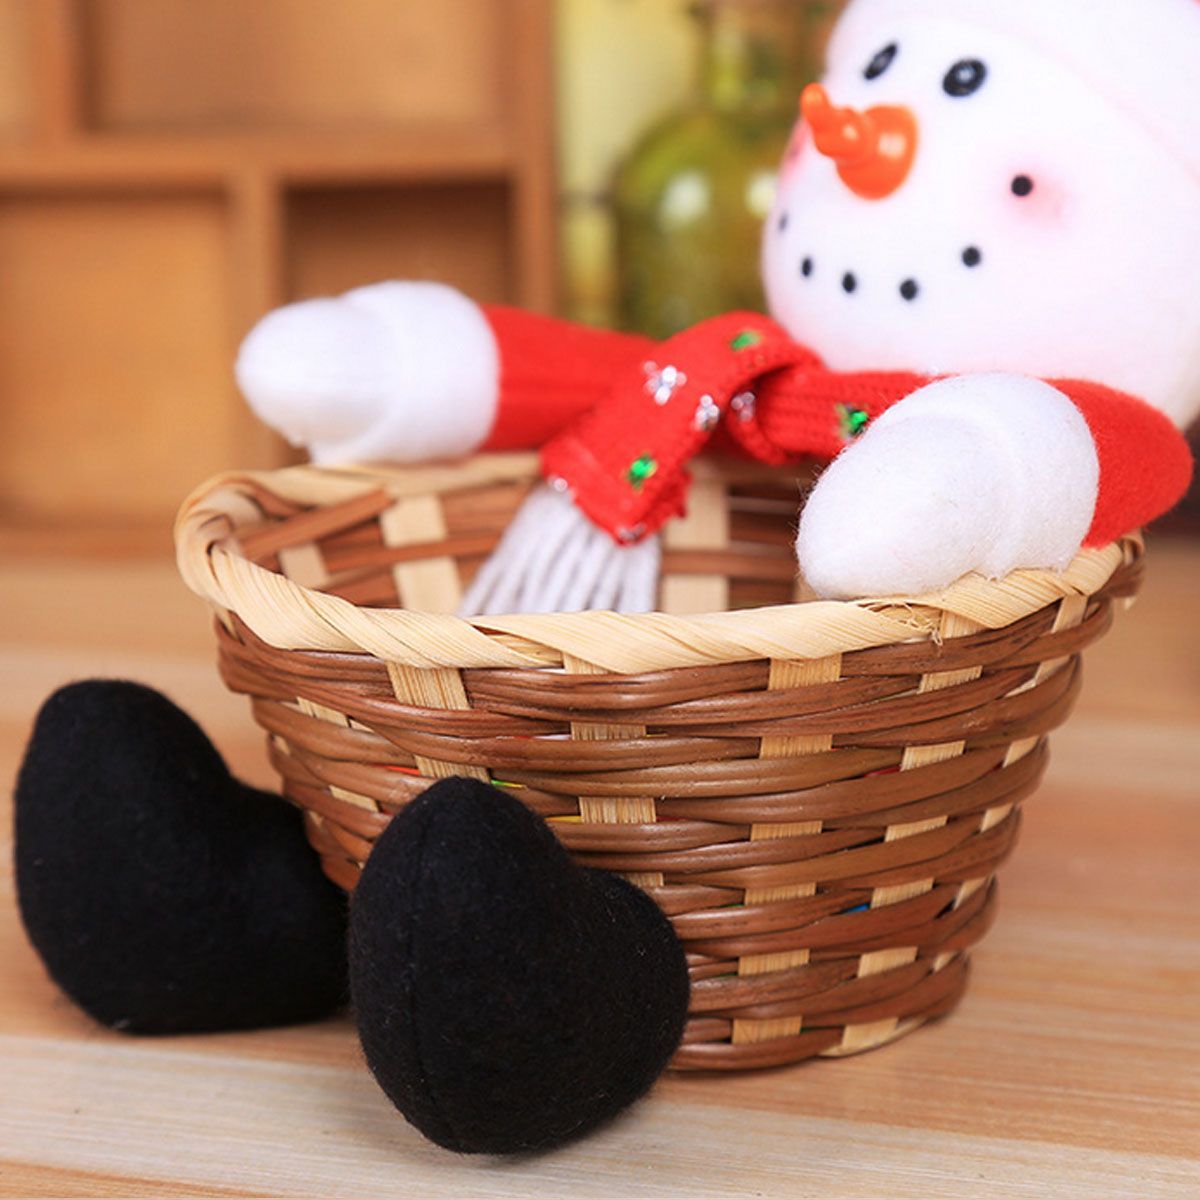 5-Types-Christmas-Candy-Storage-Basket-Santa-Claus-Home-Decorations-Ornaments-1477556